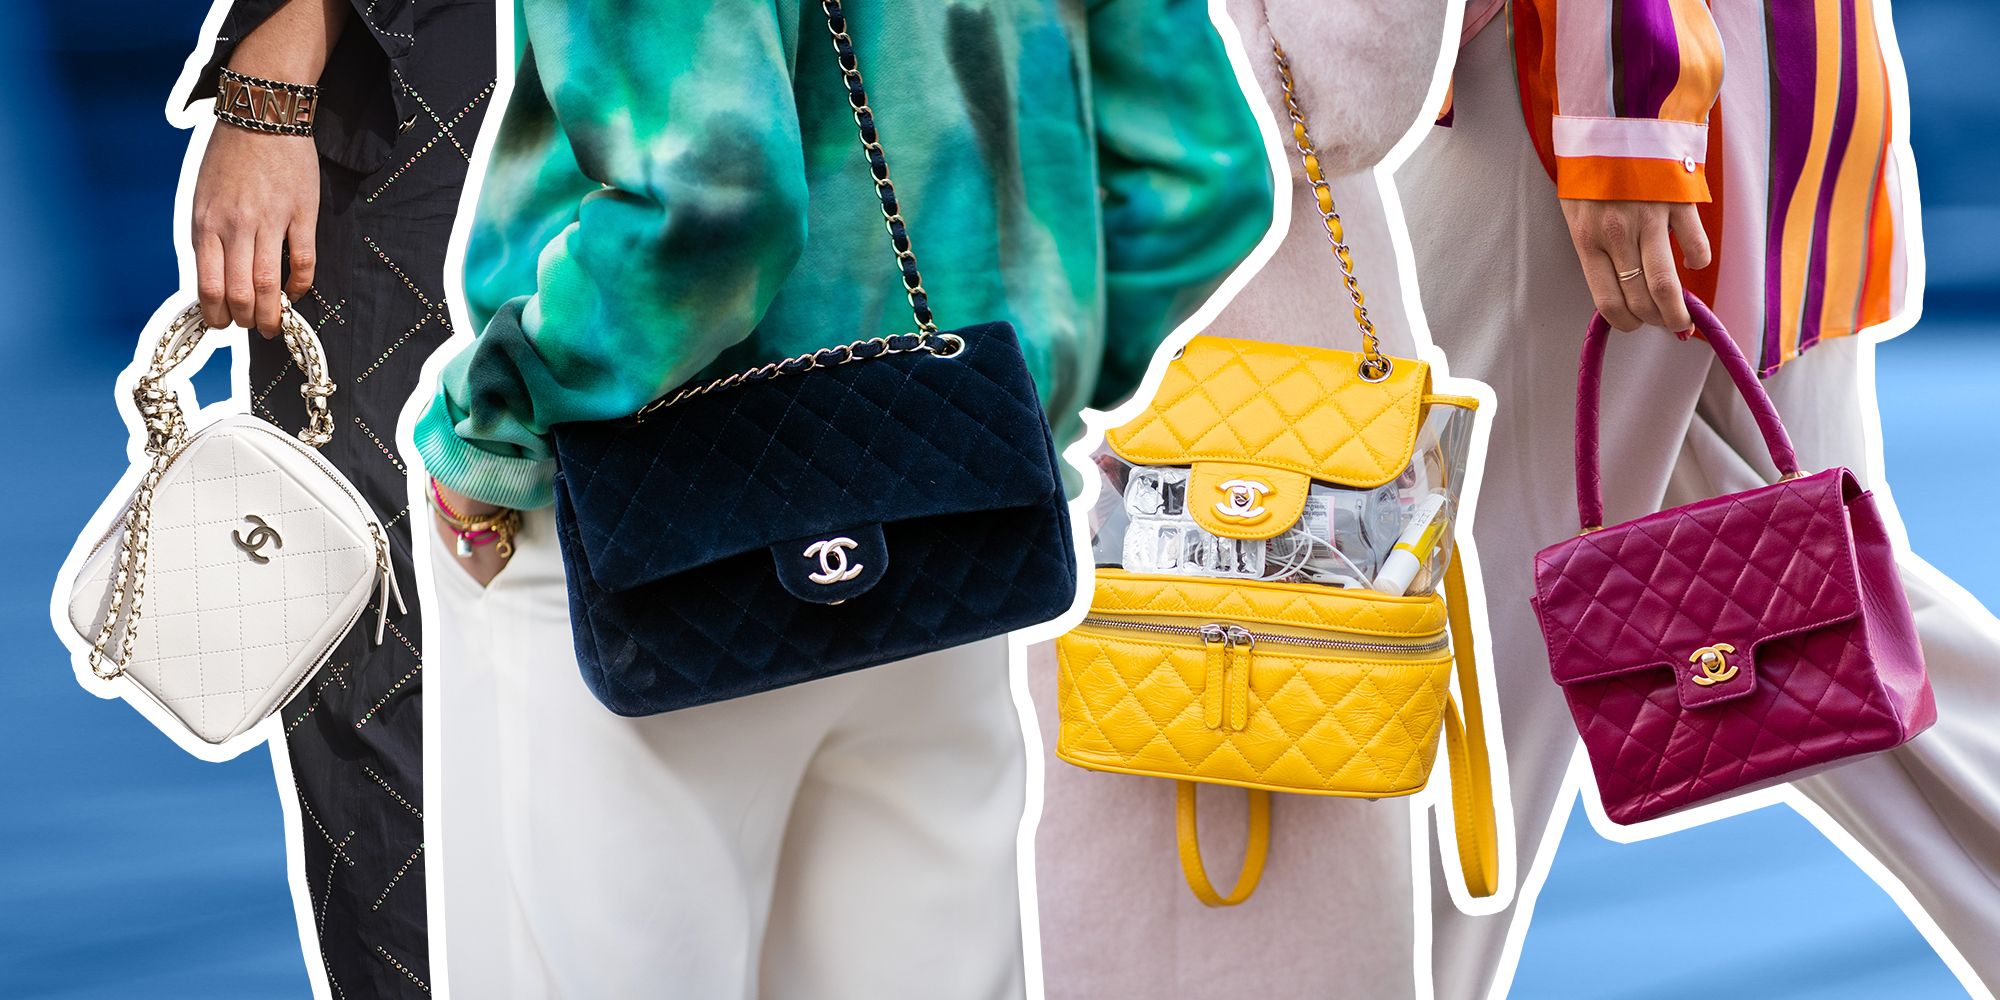 Chanel hikes handbag prices in runup to Christmas  Reuters